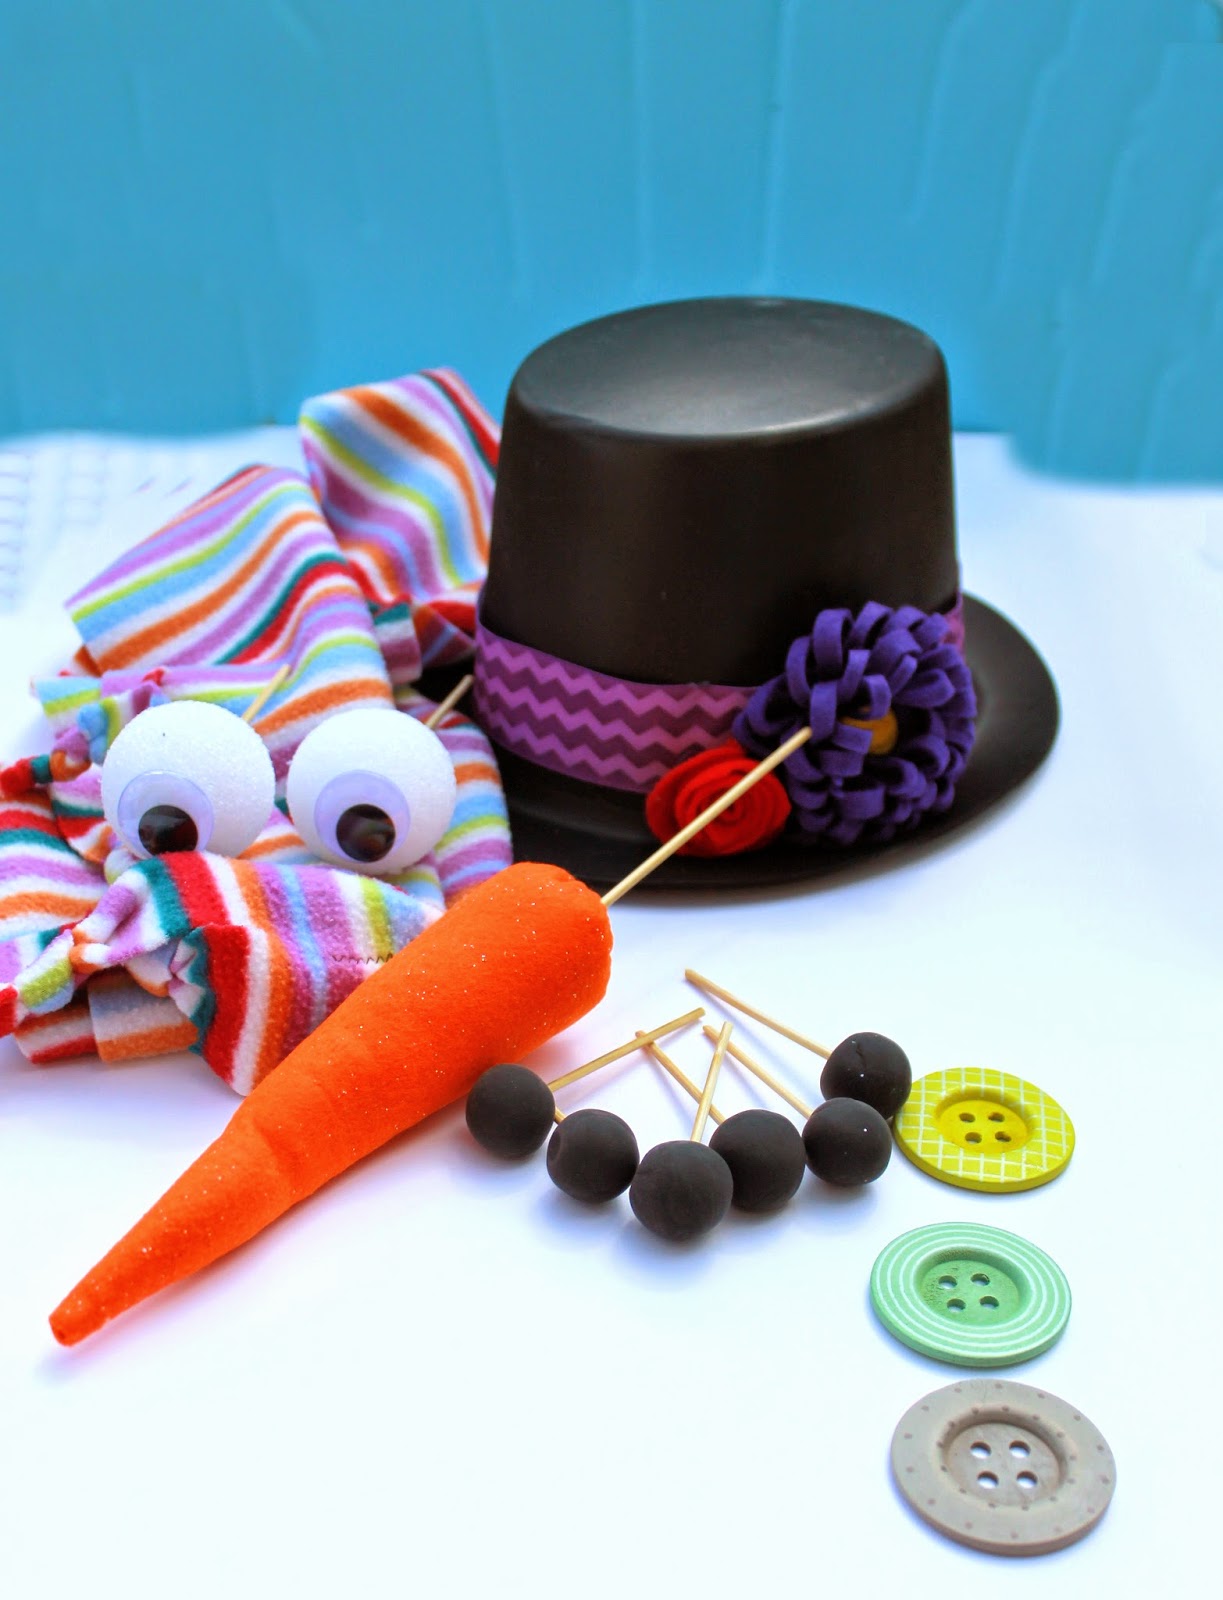 Just Add Snow Snowman Making Kit With Carrot Nose Scarf Hat Eye